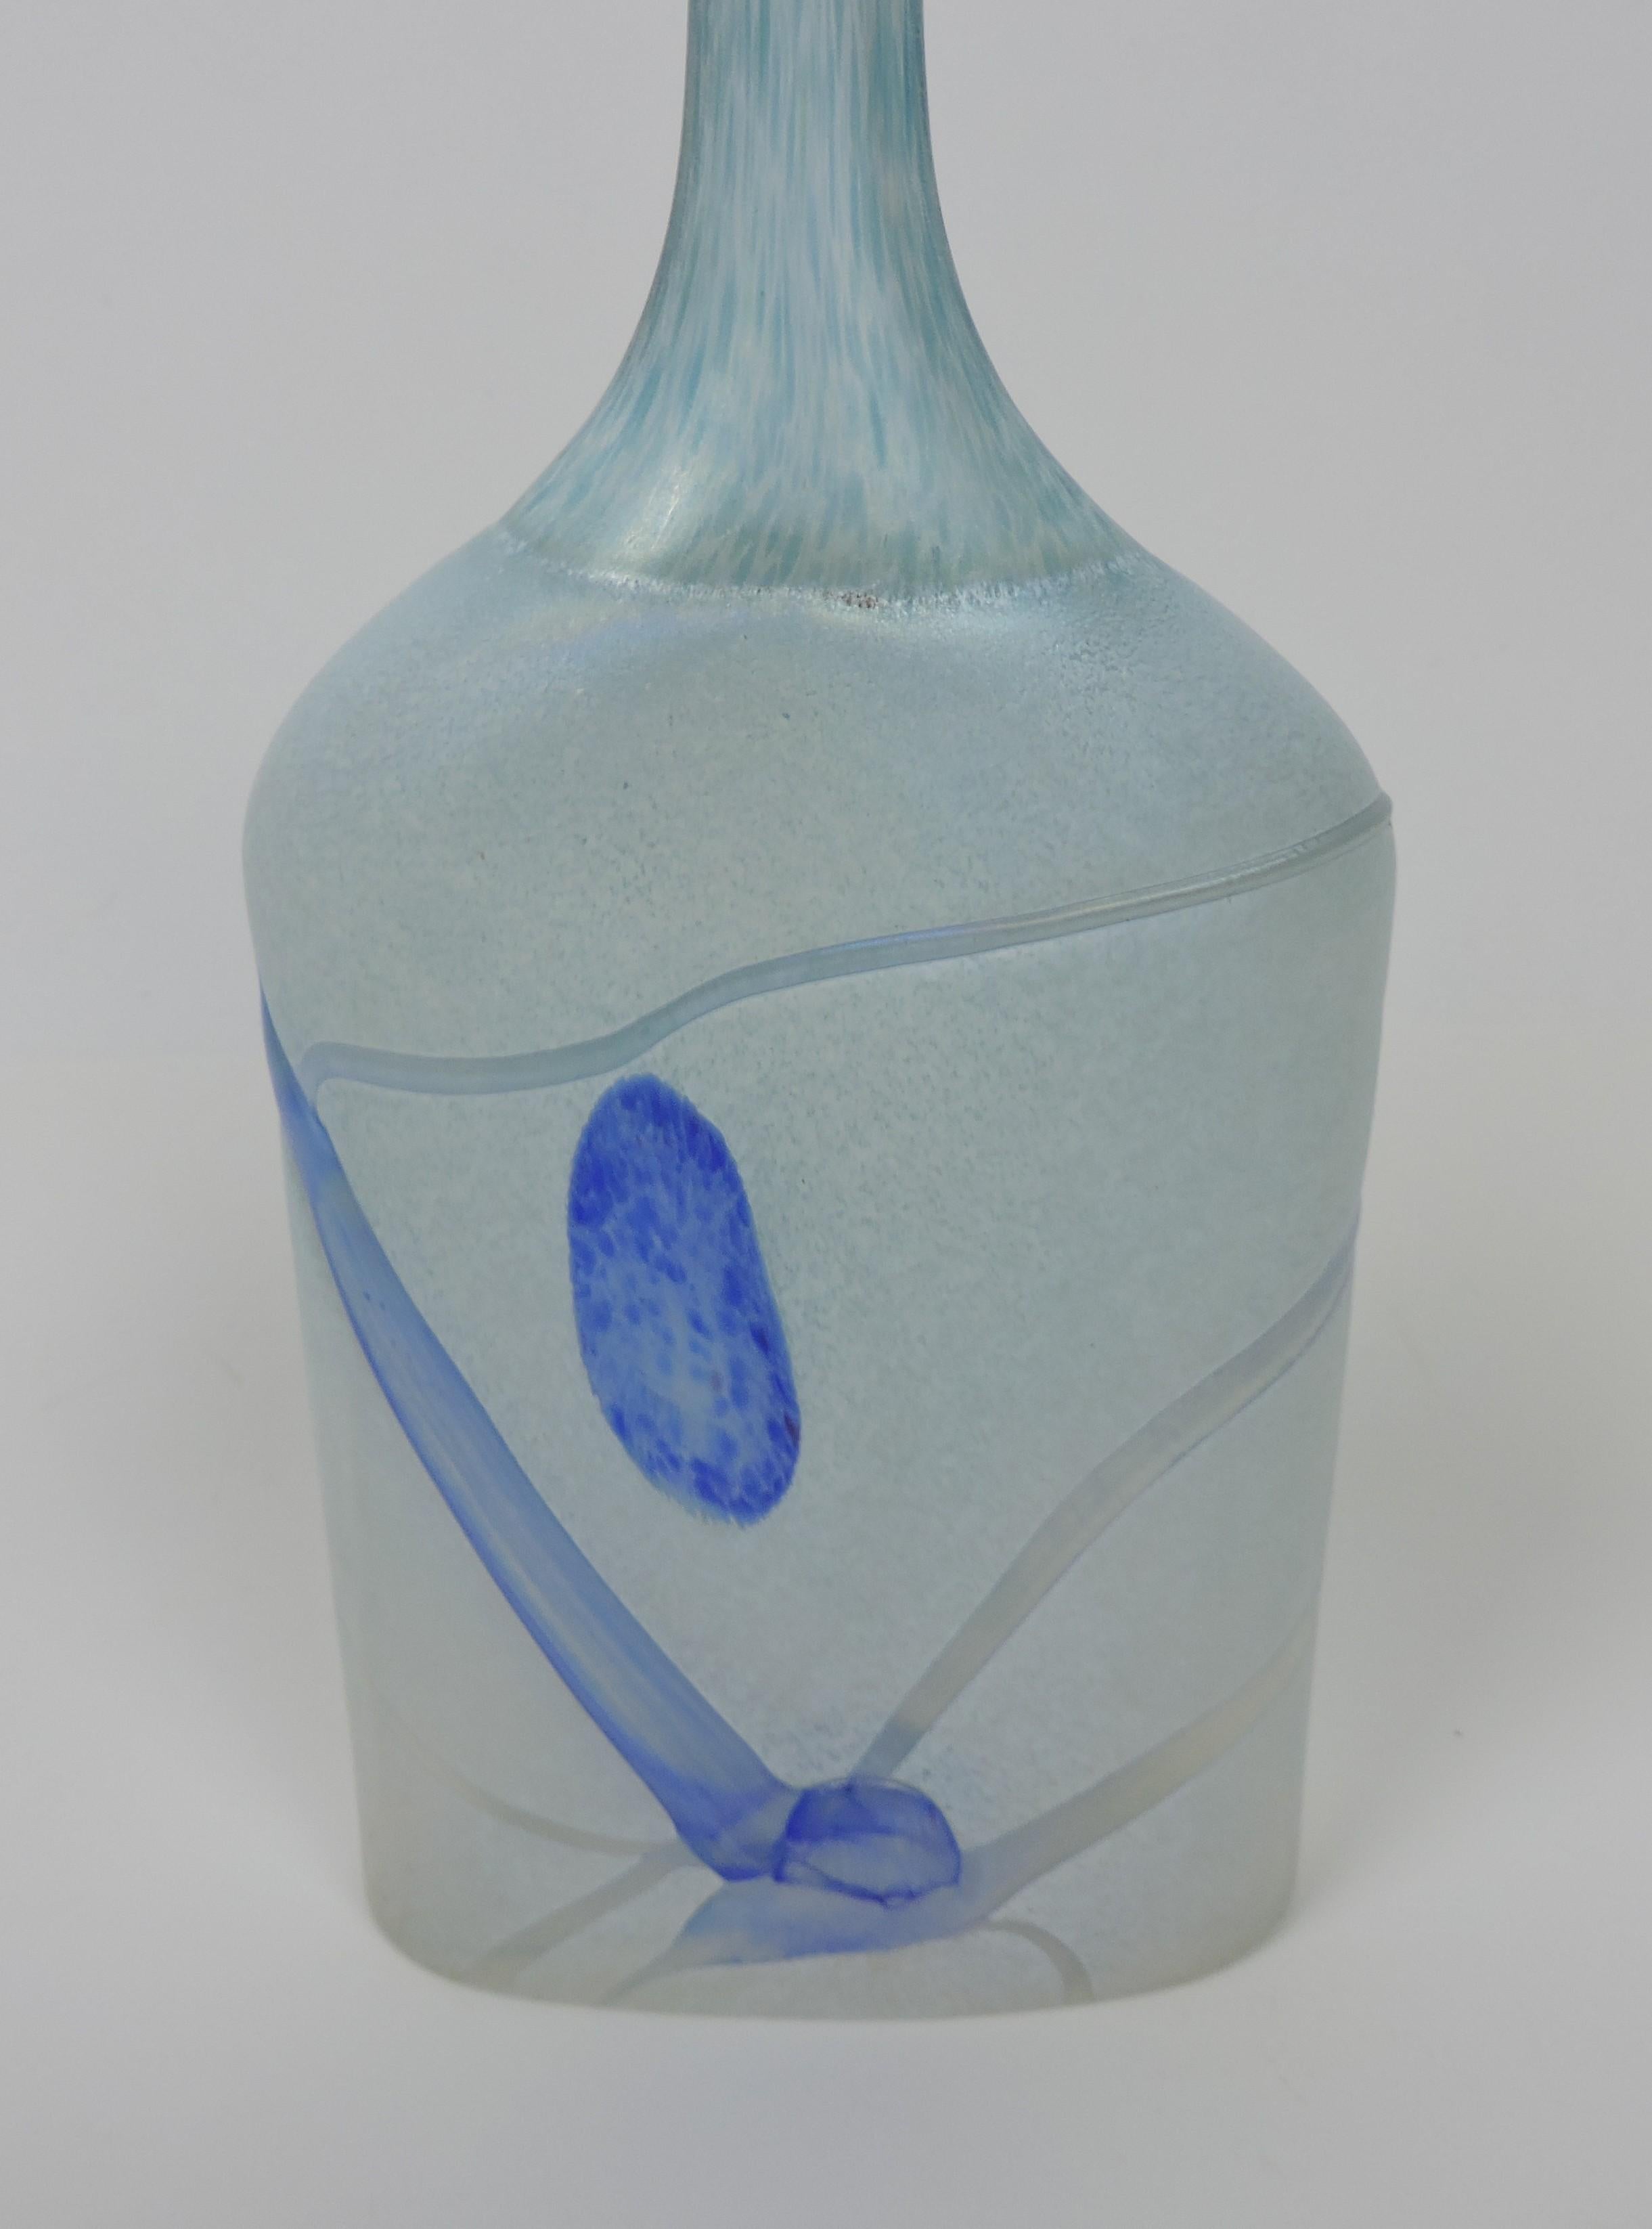 Bertil Vallien Kosta Boda Glass Vase Galaxy Blue Series 1980s Artists Collection In Good Condition For Sale In Chesterfield, NJ